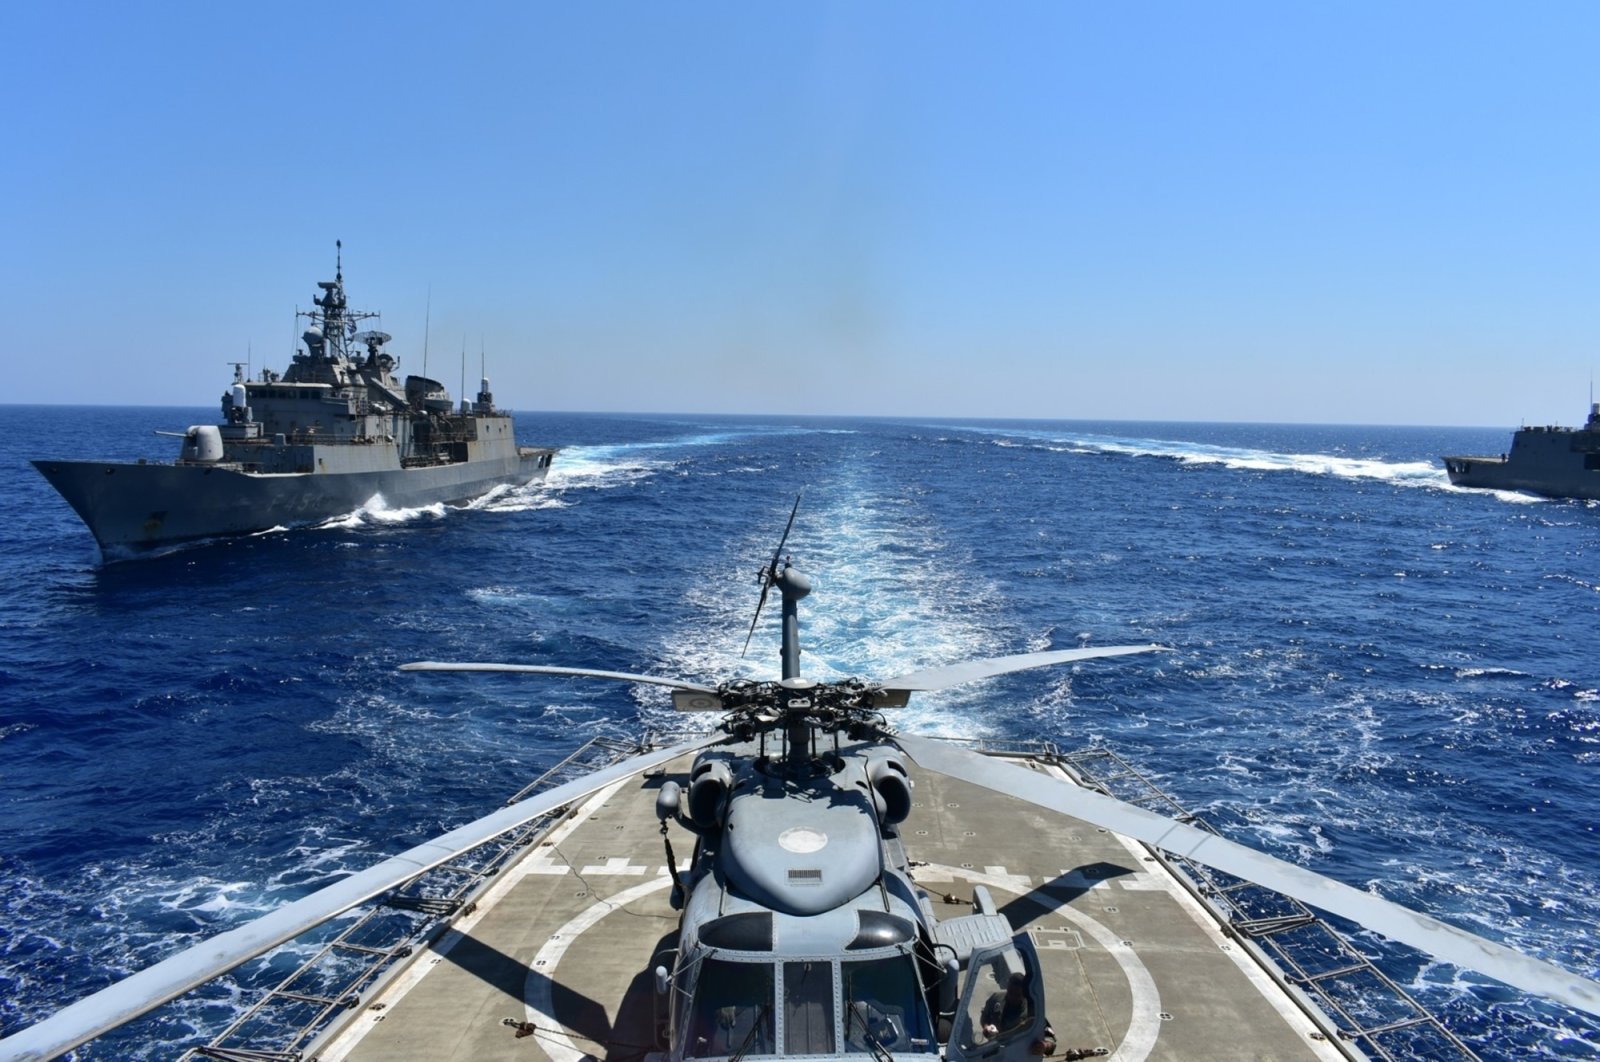 Warships take part in a military exercise in the Eastern Mediterranean sea, Aug. 25, 2020. (Greek Defense Ministry via AP)